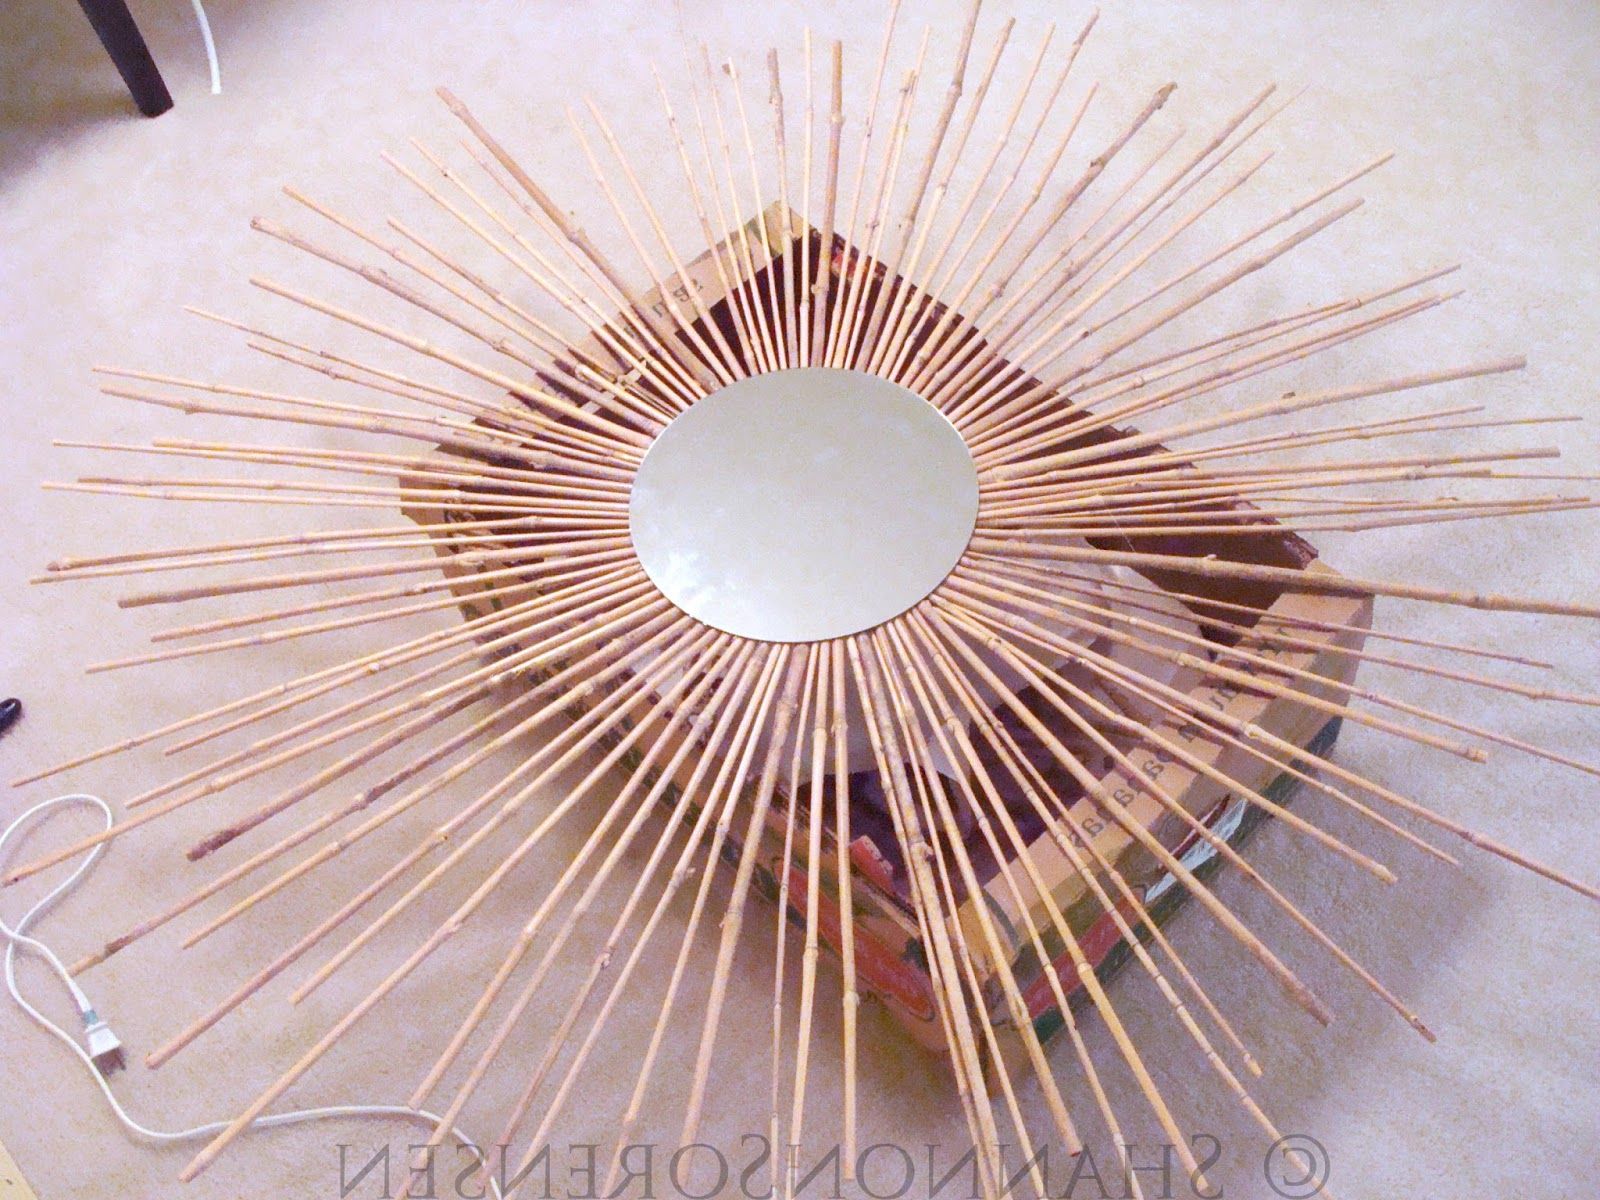 Mirror: Make Funky Sunburst Mirror Diy For Home Interiors — Villa With Most Popular Diy Wall Mirrors (View 20 of 20)